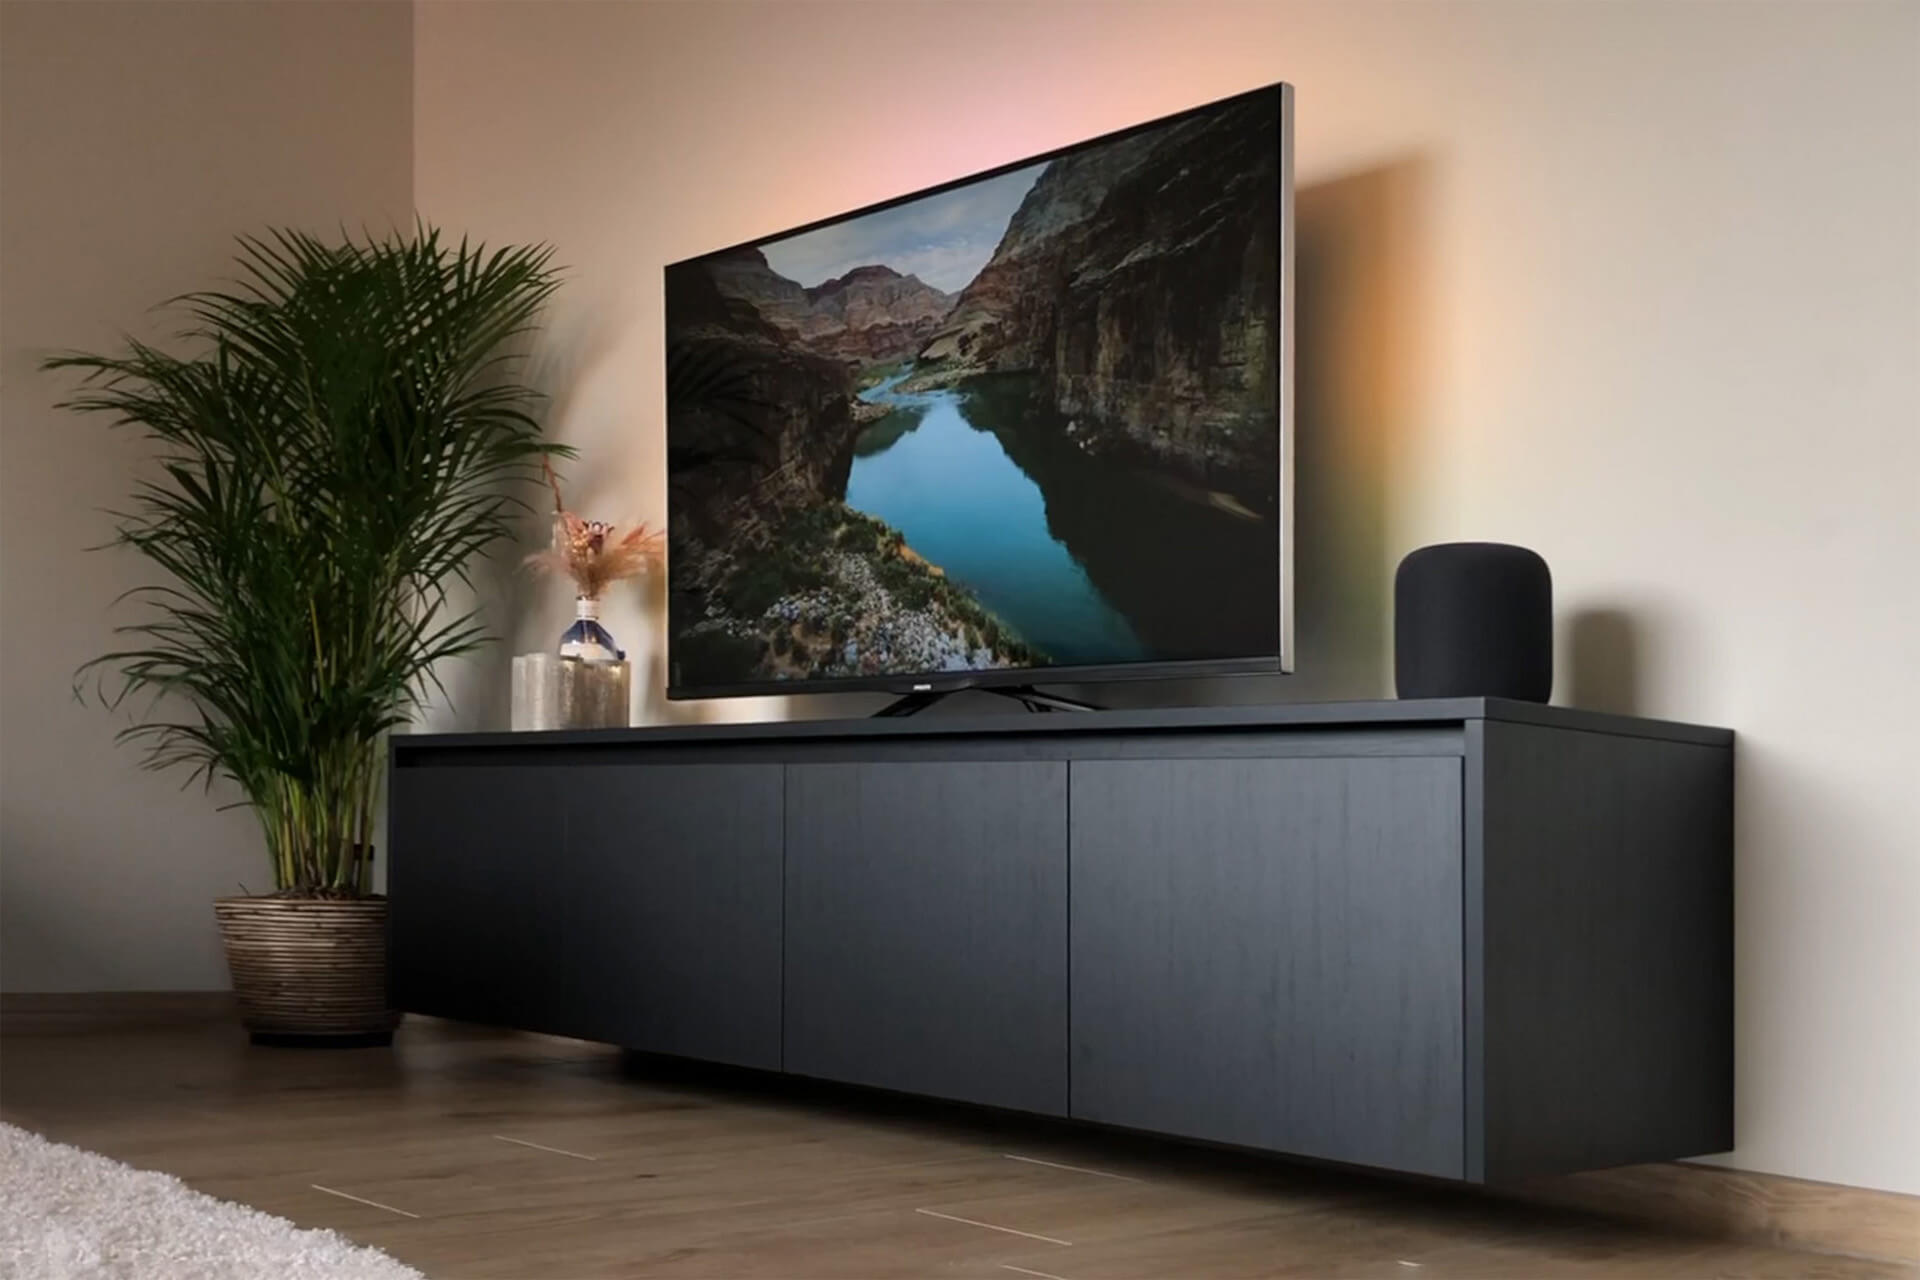 Made-to-measure floating TV unit in black and wood